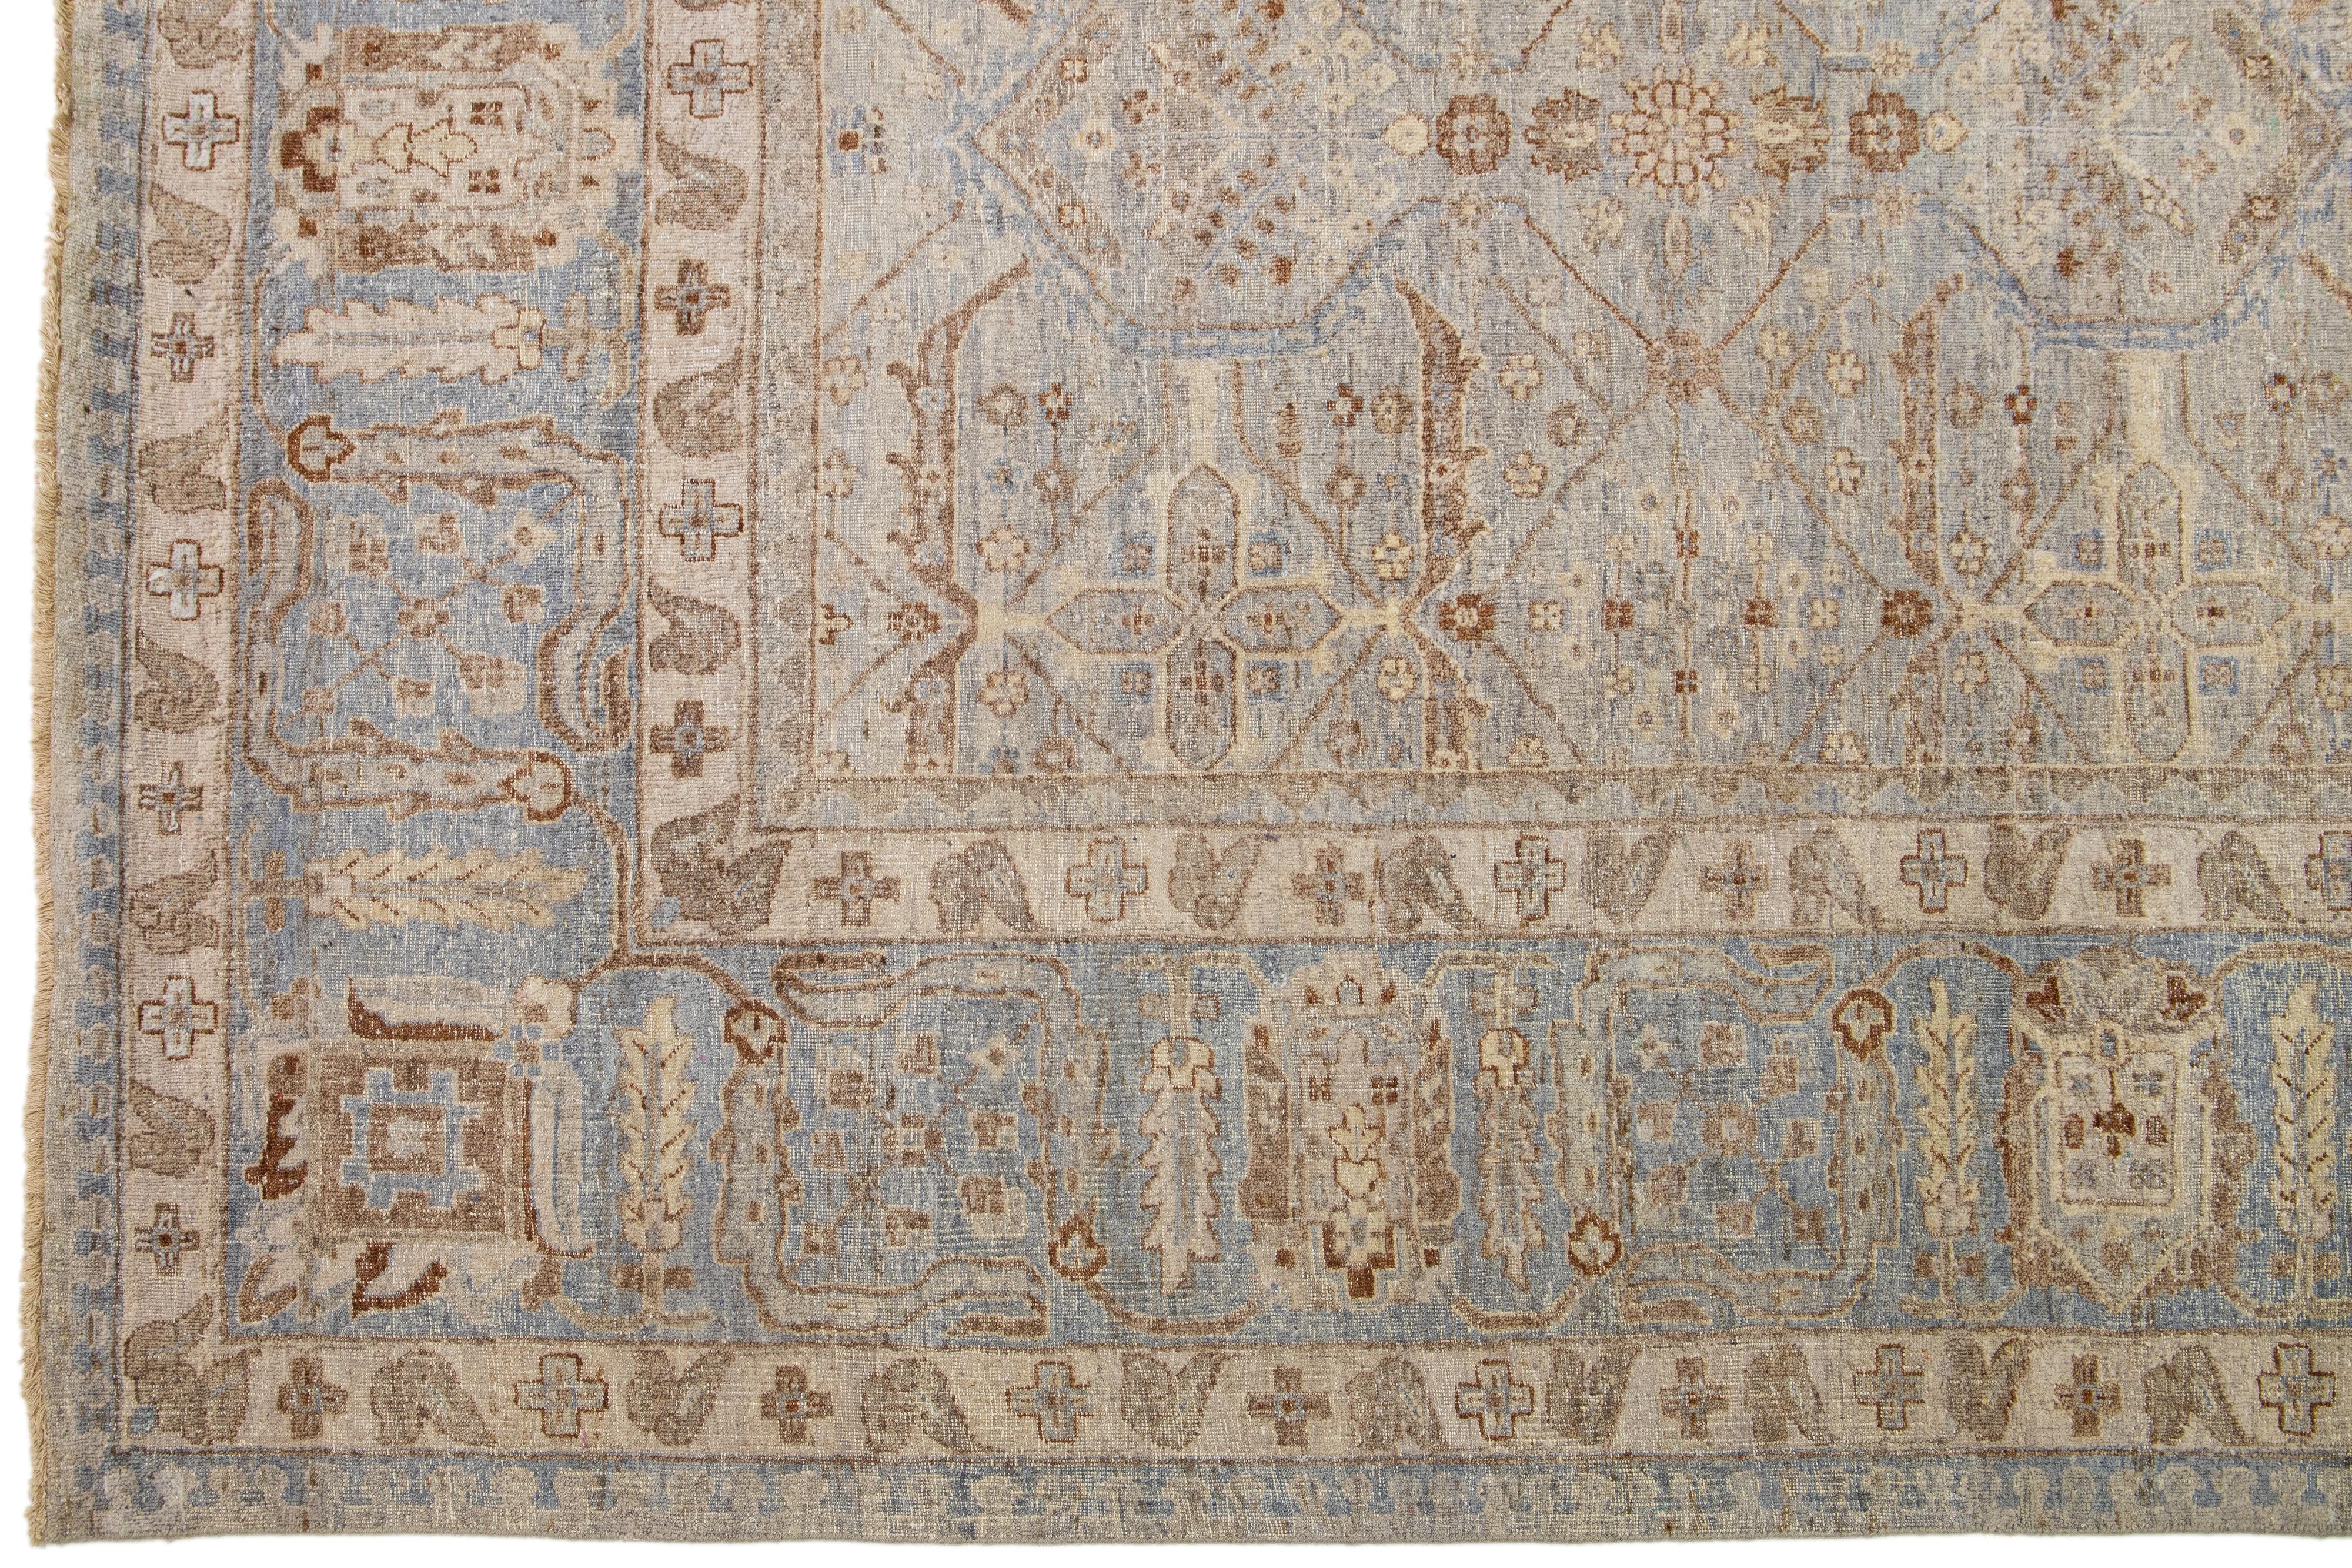 Oversize Modern Indian Handmade Geometric Blue Wool Rug by Apadana In New Condition For Sale In Norwalk, CT